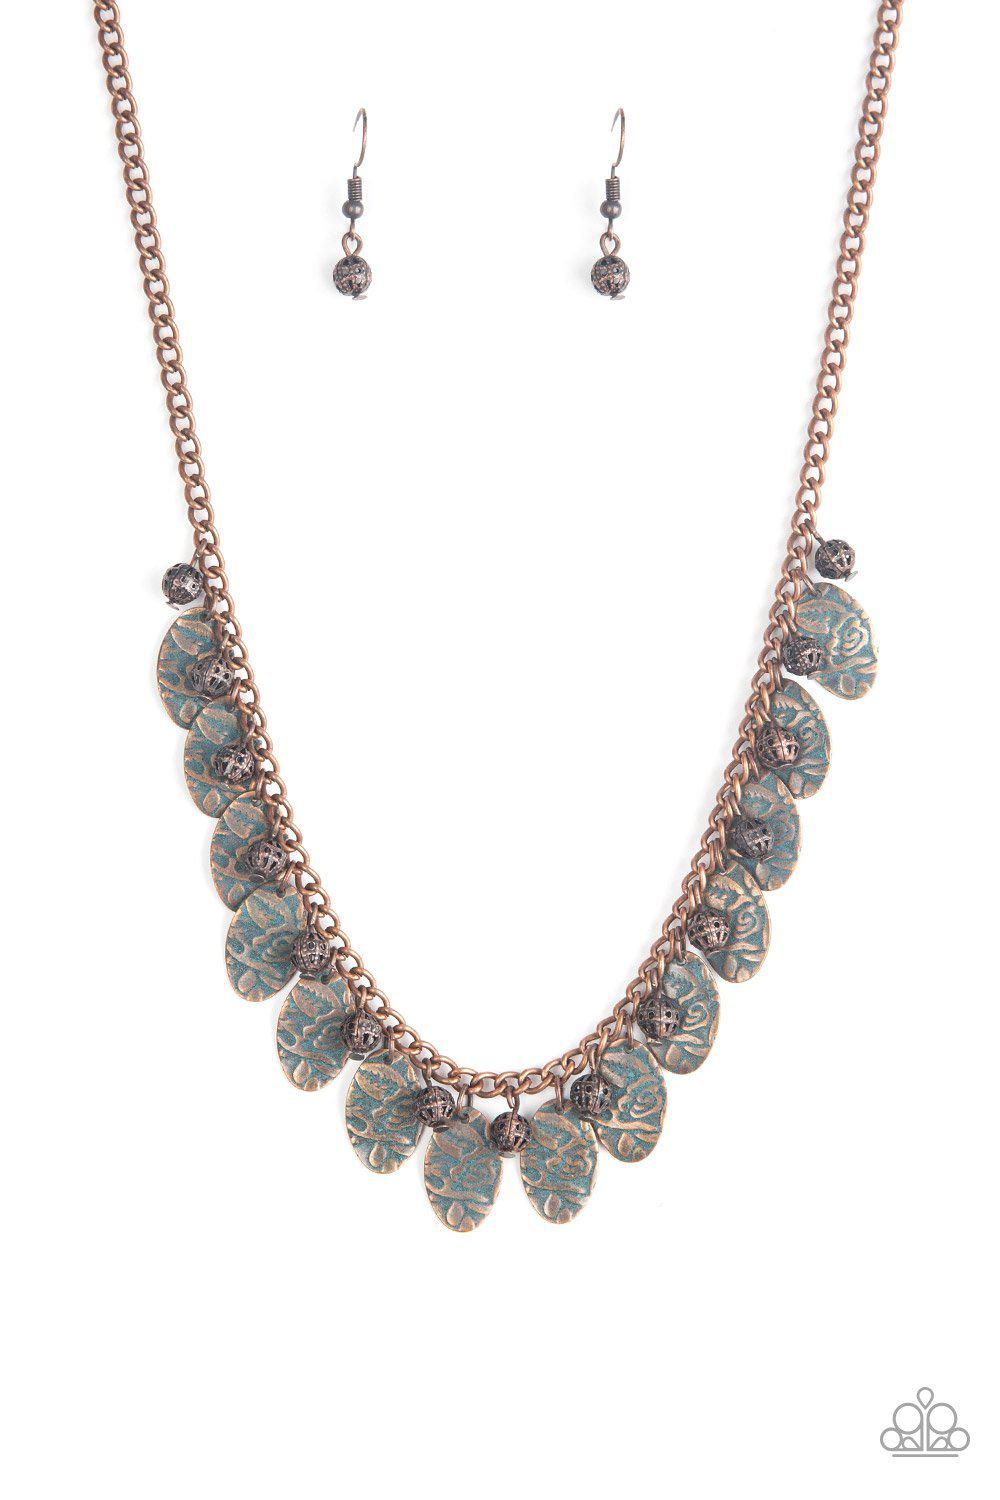 Vintage Gardens Copper Patina Finish Necklace - Paparazzi Accessories-CarasShop.com - $5 Jewelry by Cara Jewels